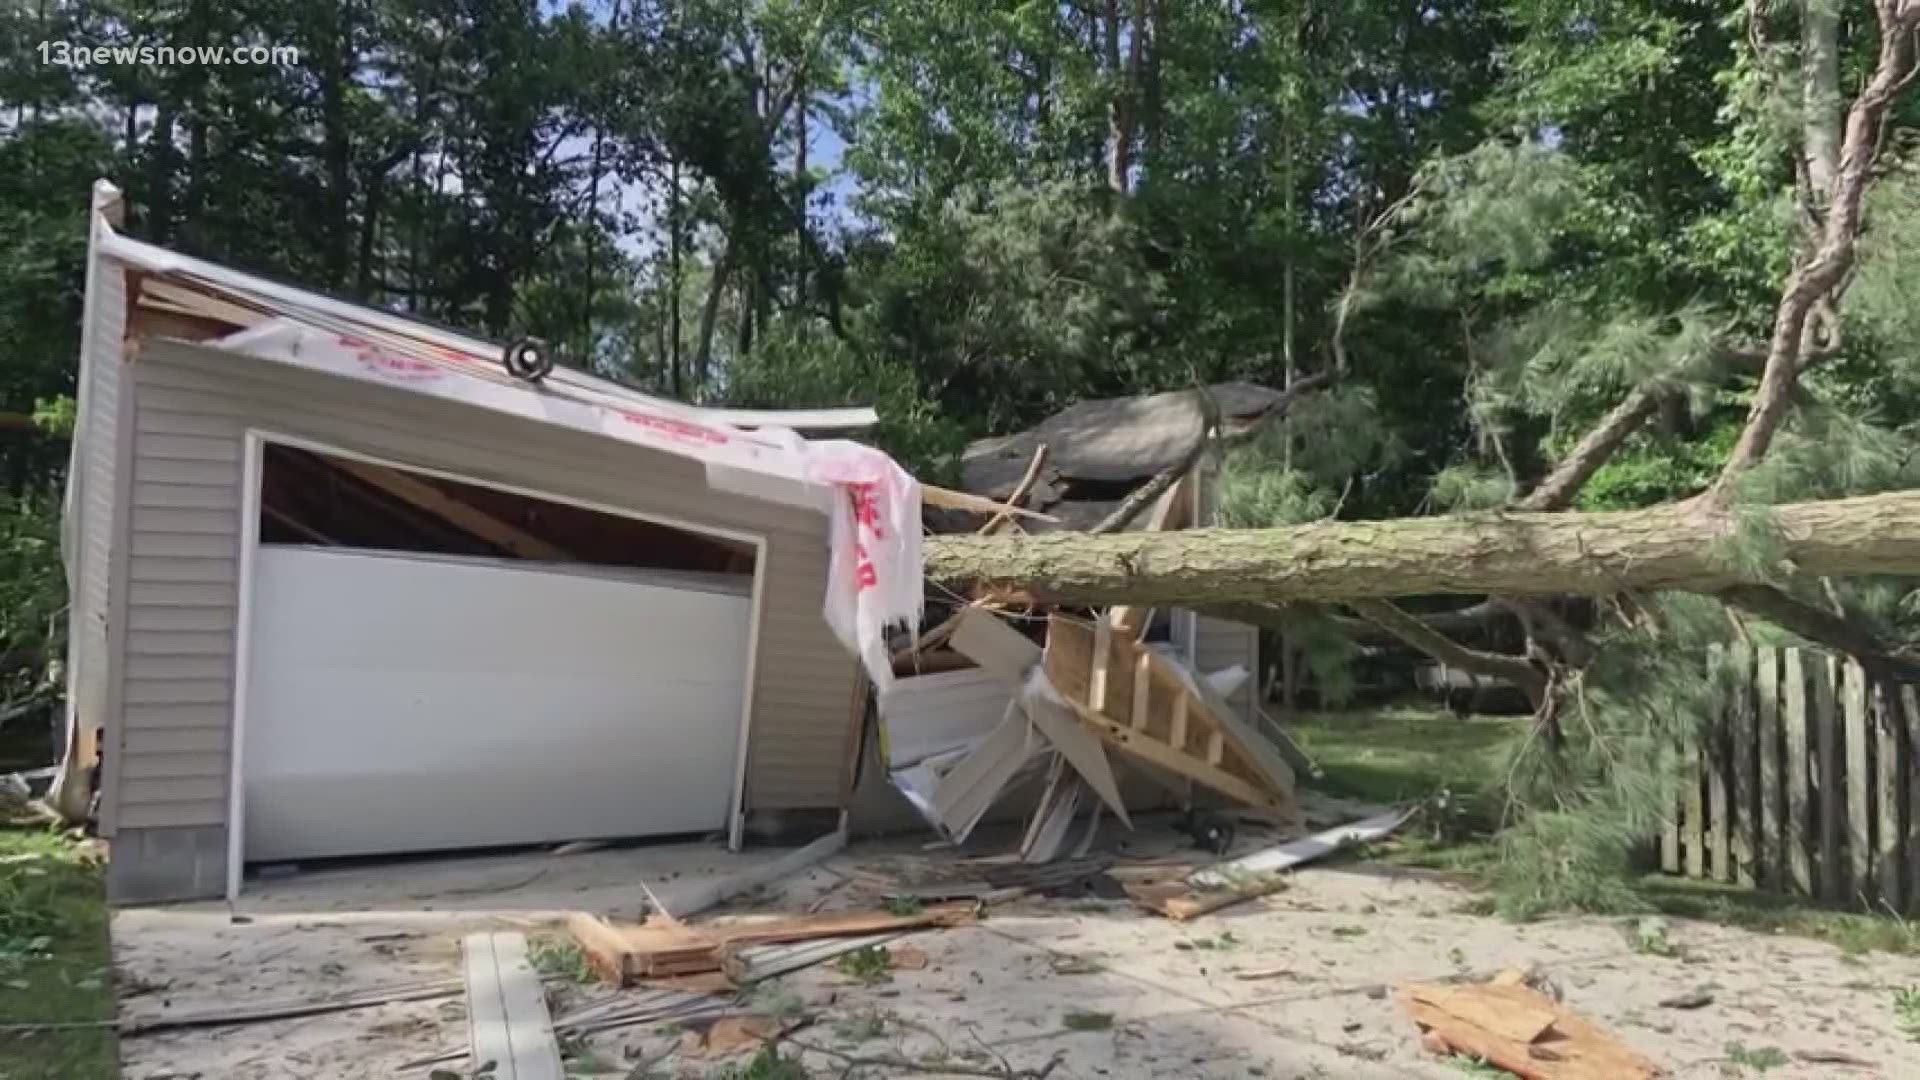 Tropical Storm Elsa came through Hampton Roads and left behind a marginal mess, leaving Suffolk residents to pay out of pocket for the damages.